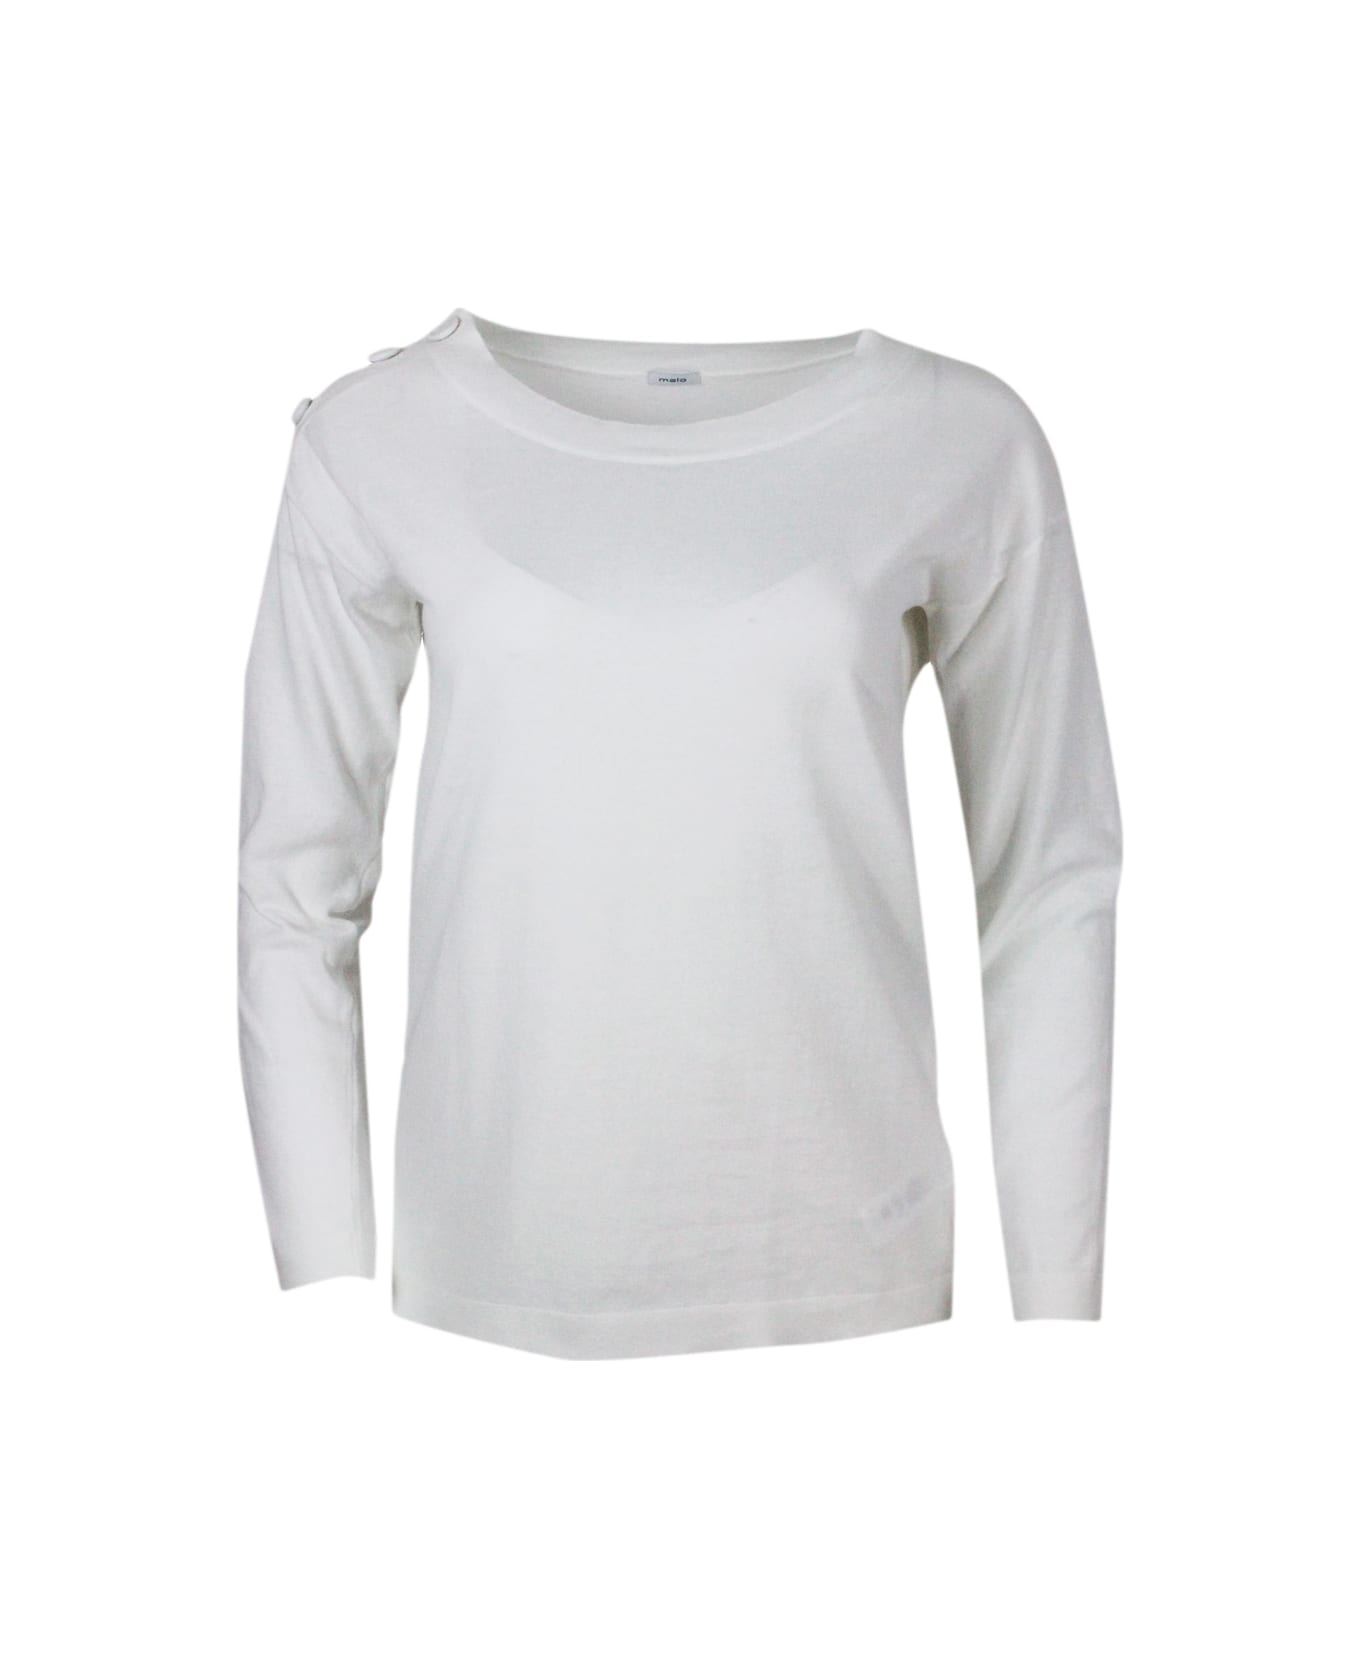 Malo Crew-neck, Long-sleeved Shirt In Cotton Thread With Buttons On The Shoulder - White ニットウェア